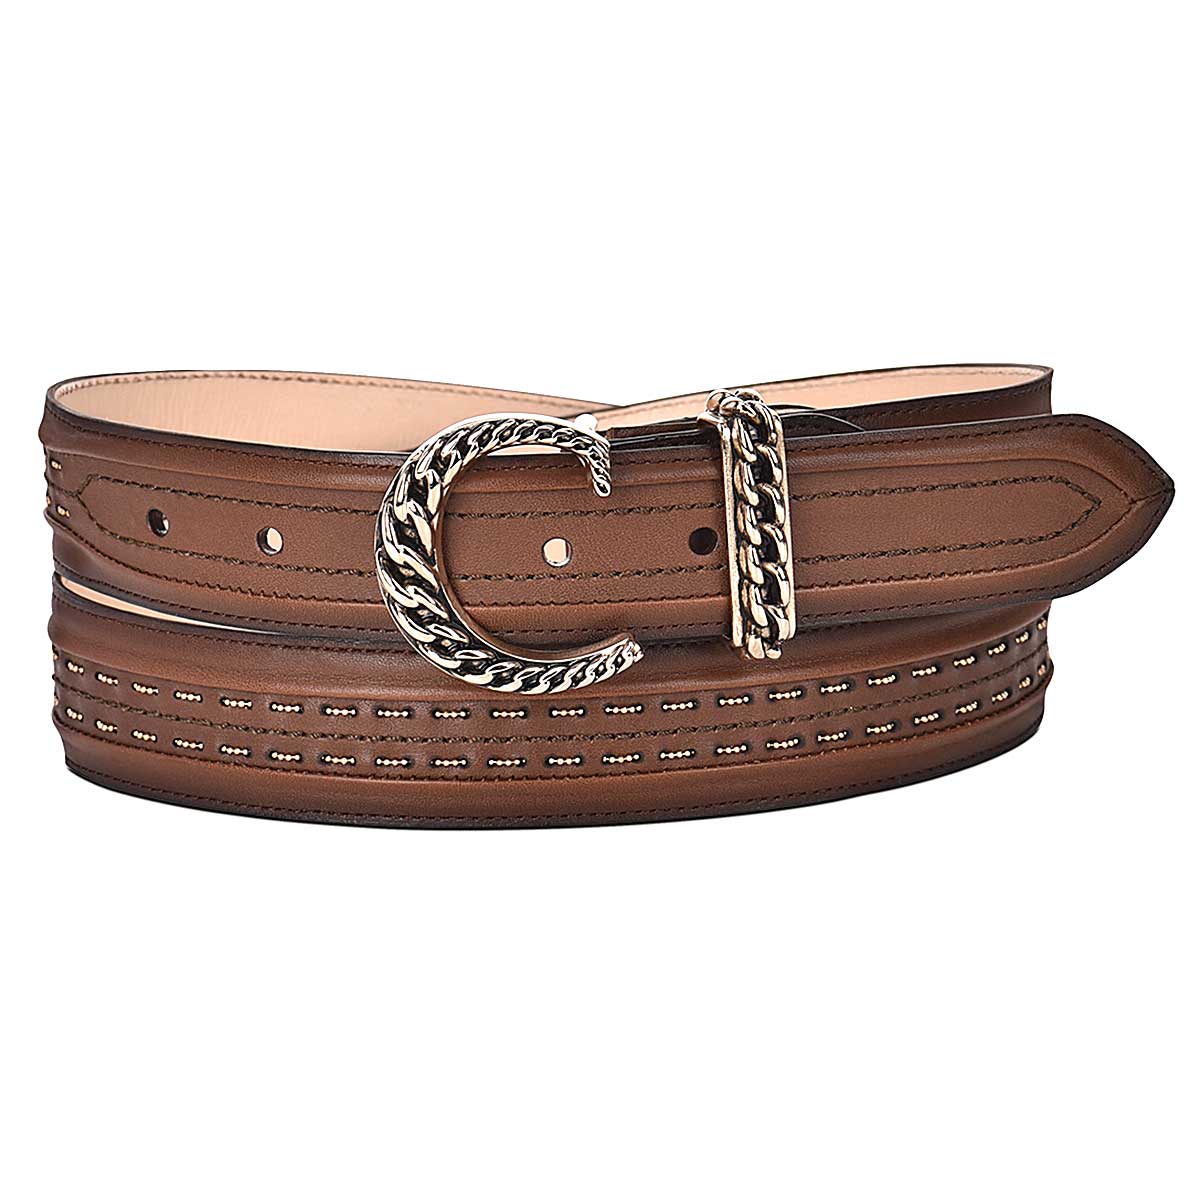 Honey leather traditional belt, Handwoven, for women - CD984RS